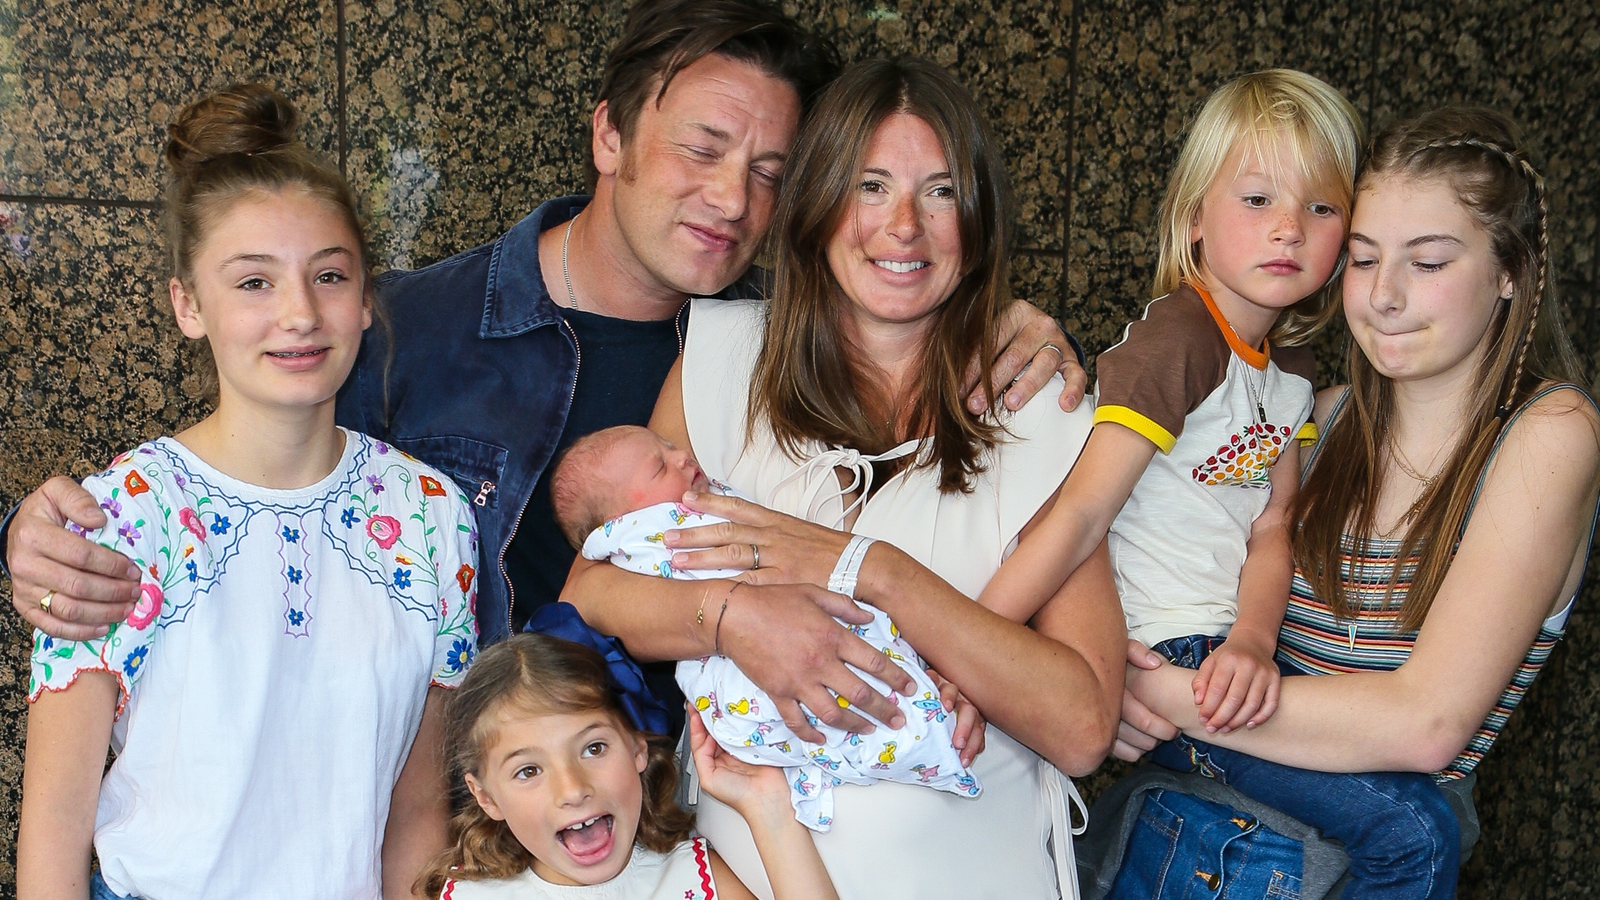 Jools Oliver reveals she suffered a miscarriage during lockdown